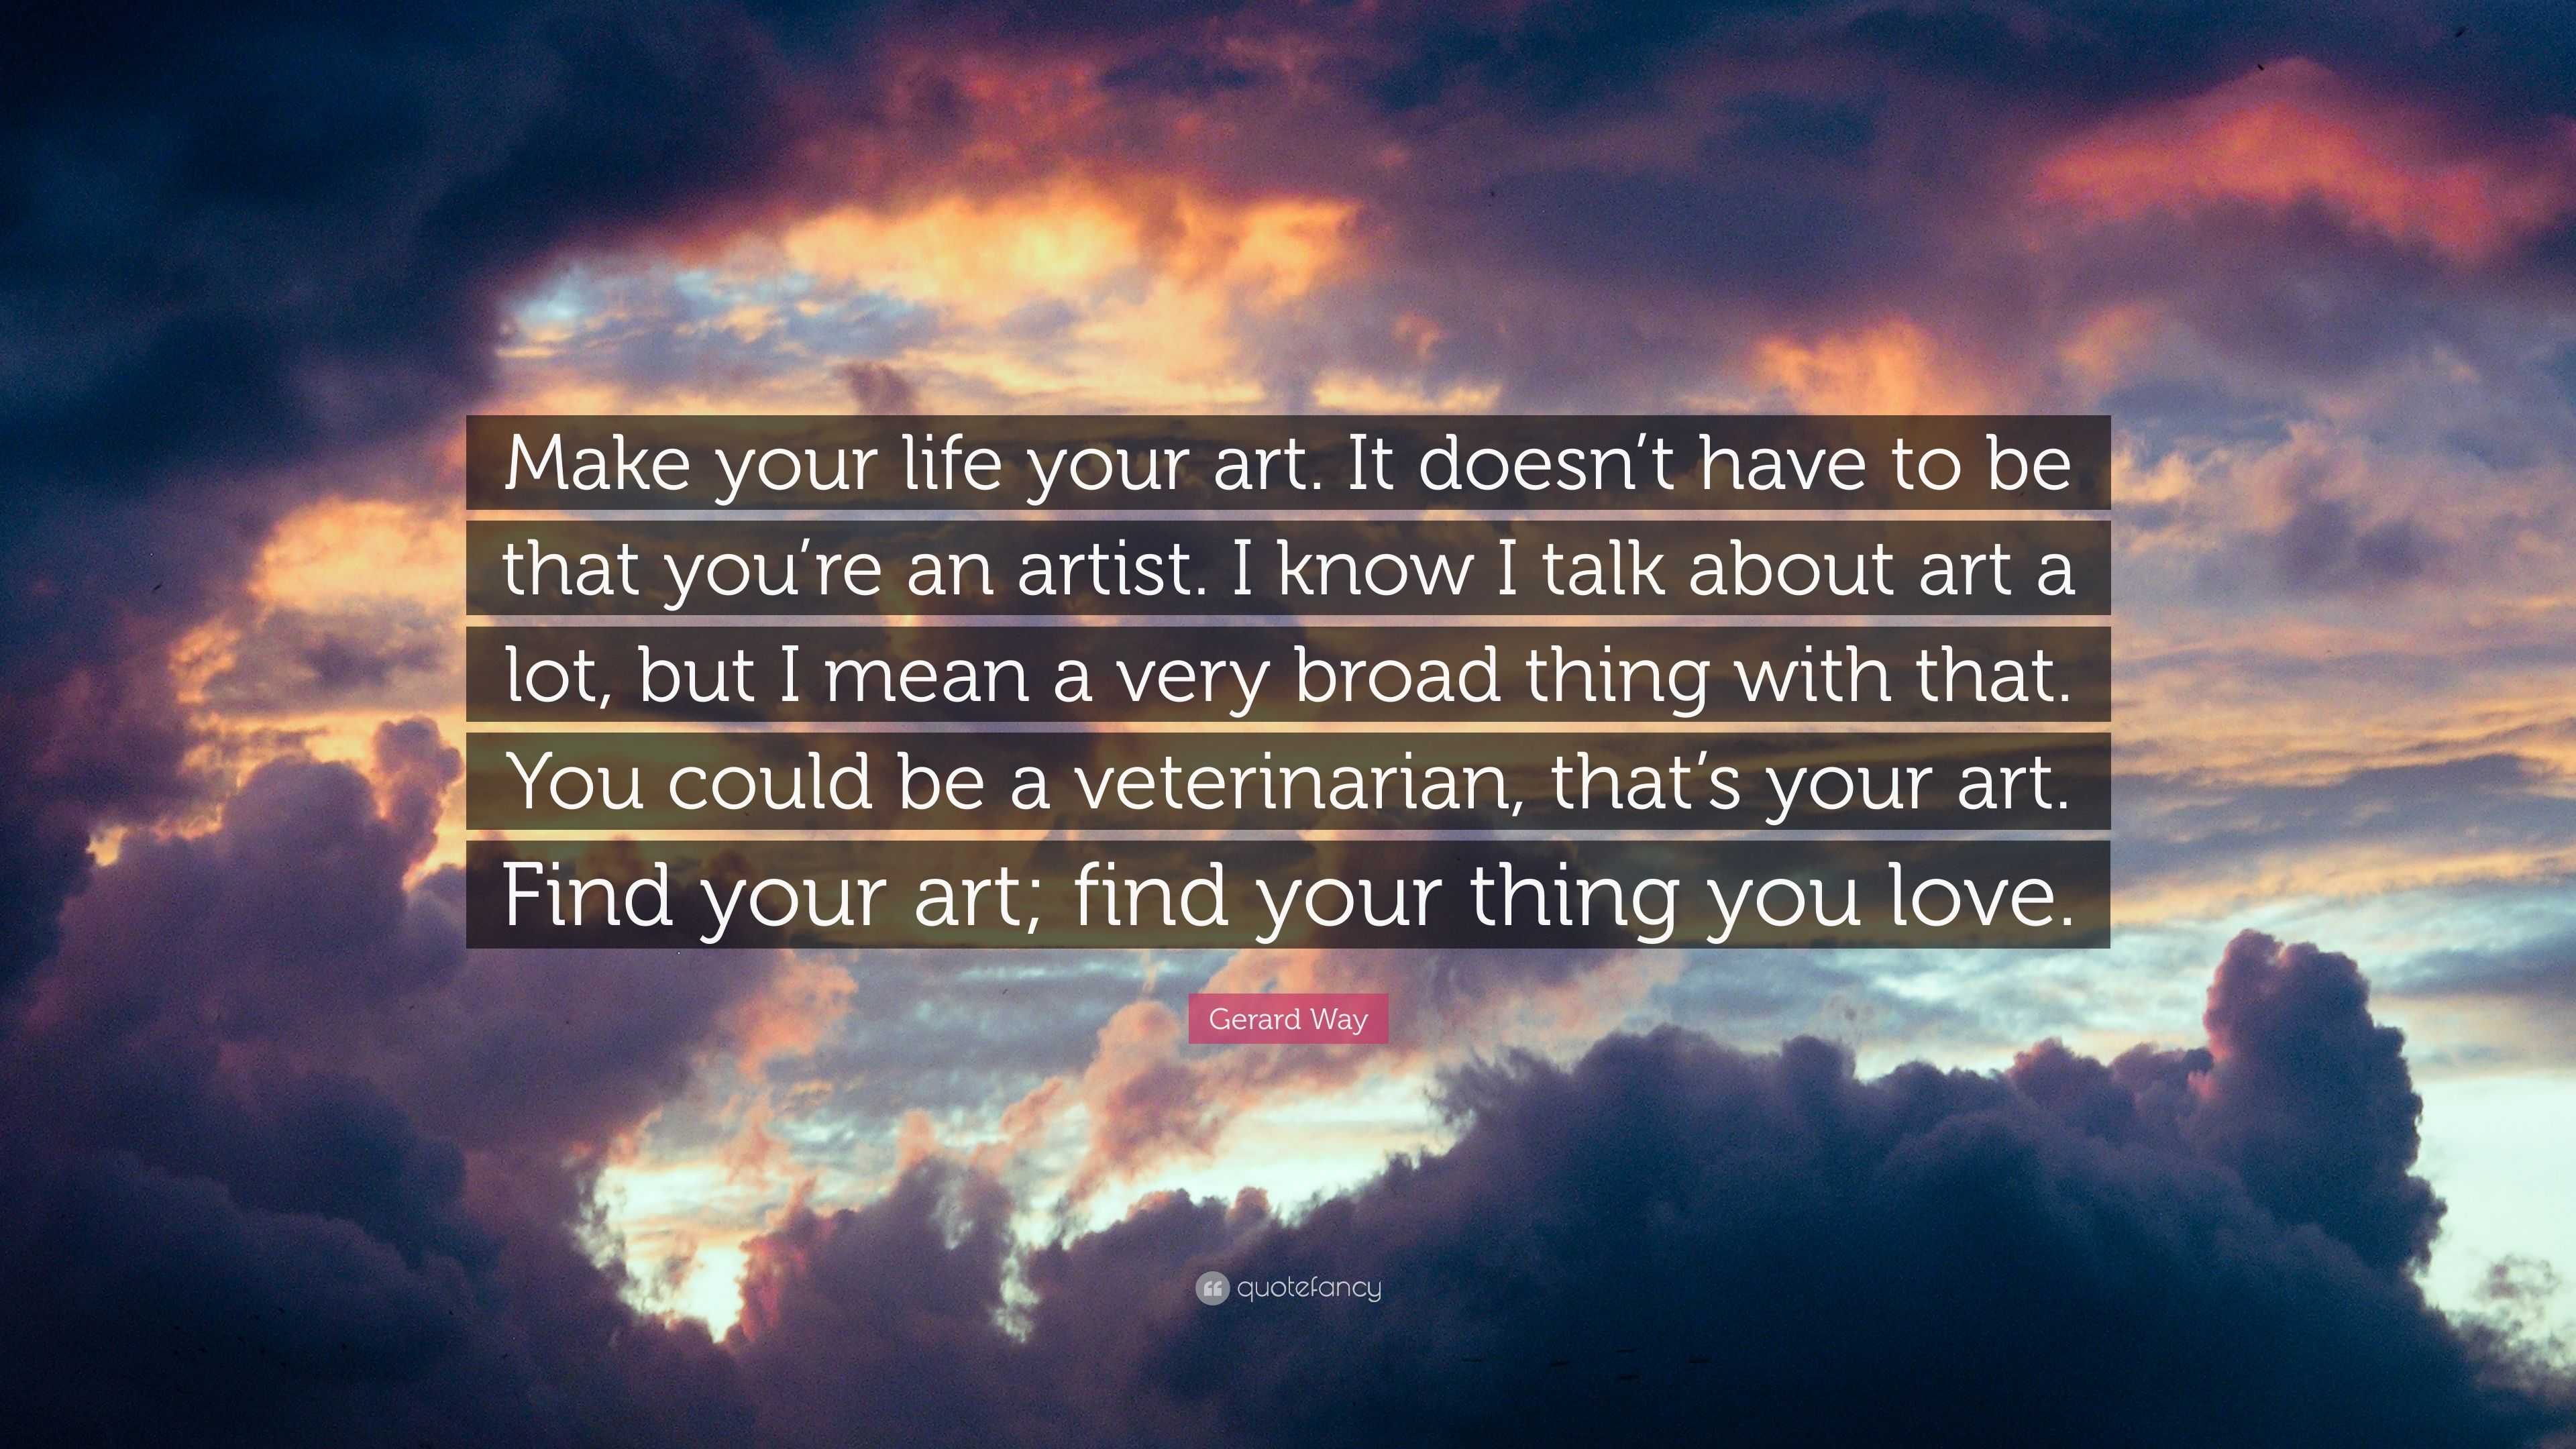 Gerard Way Quote  Make your life  your art  It doesn t 